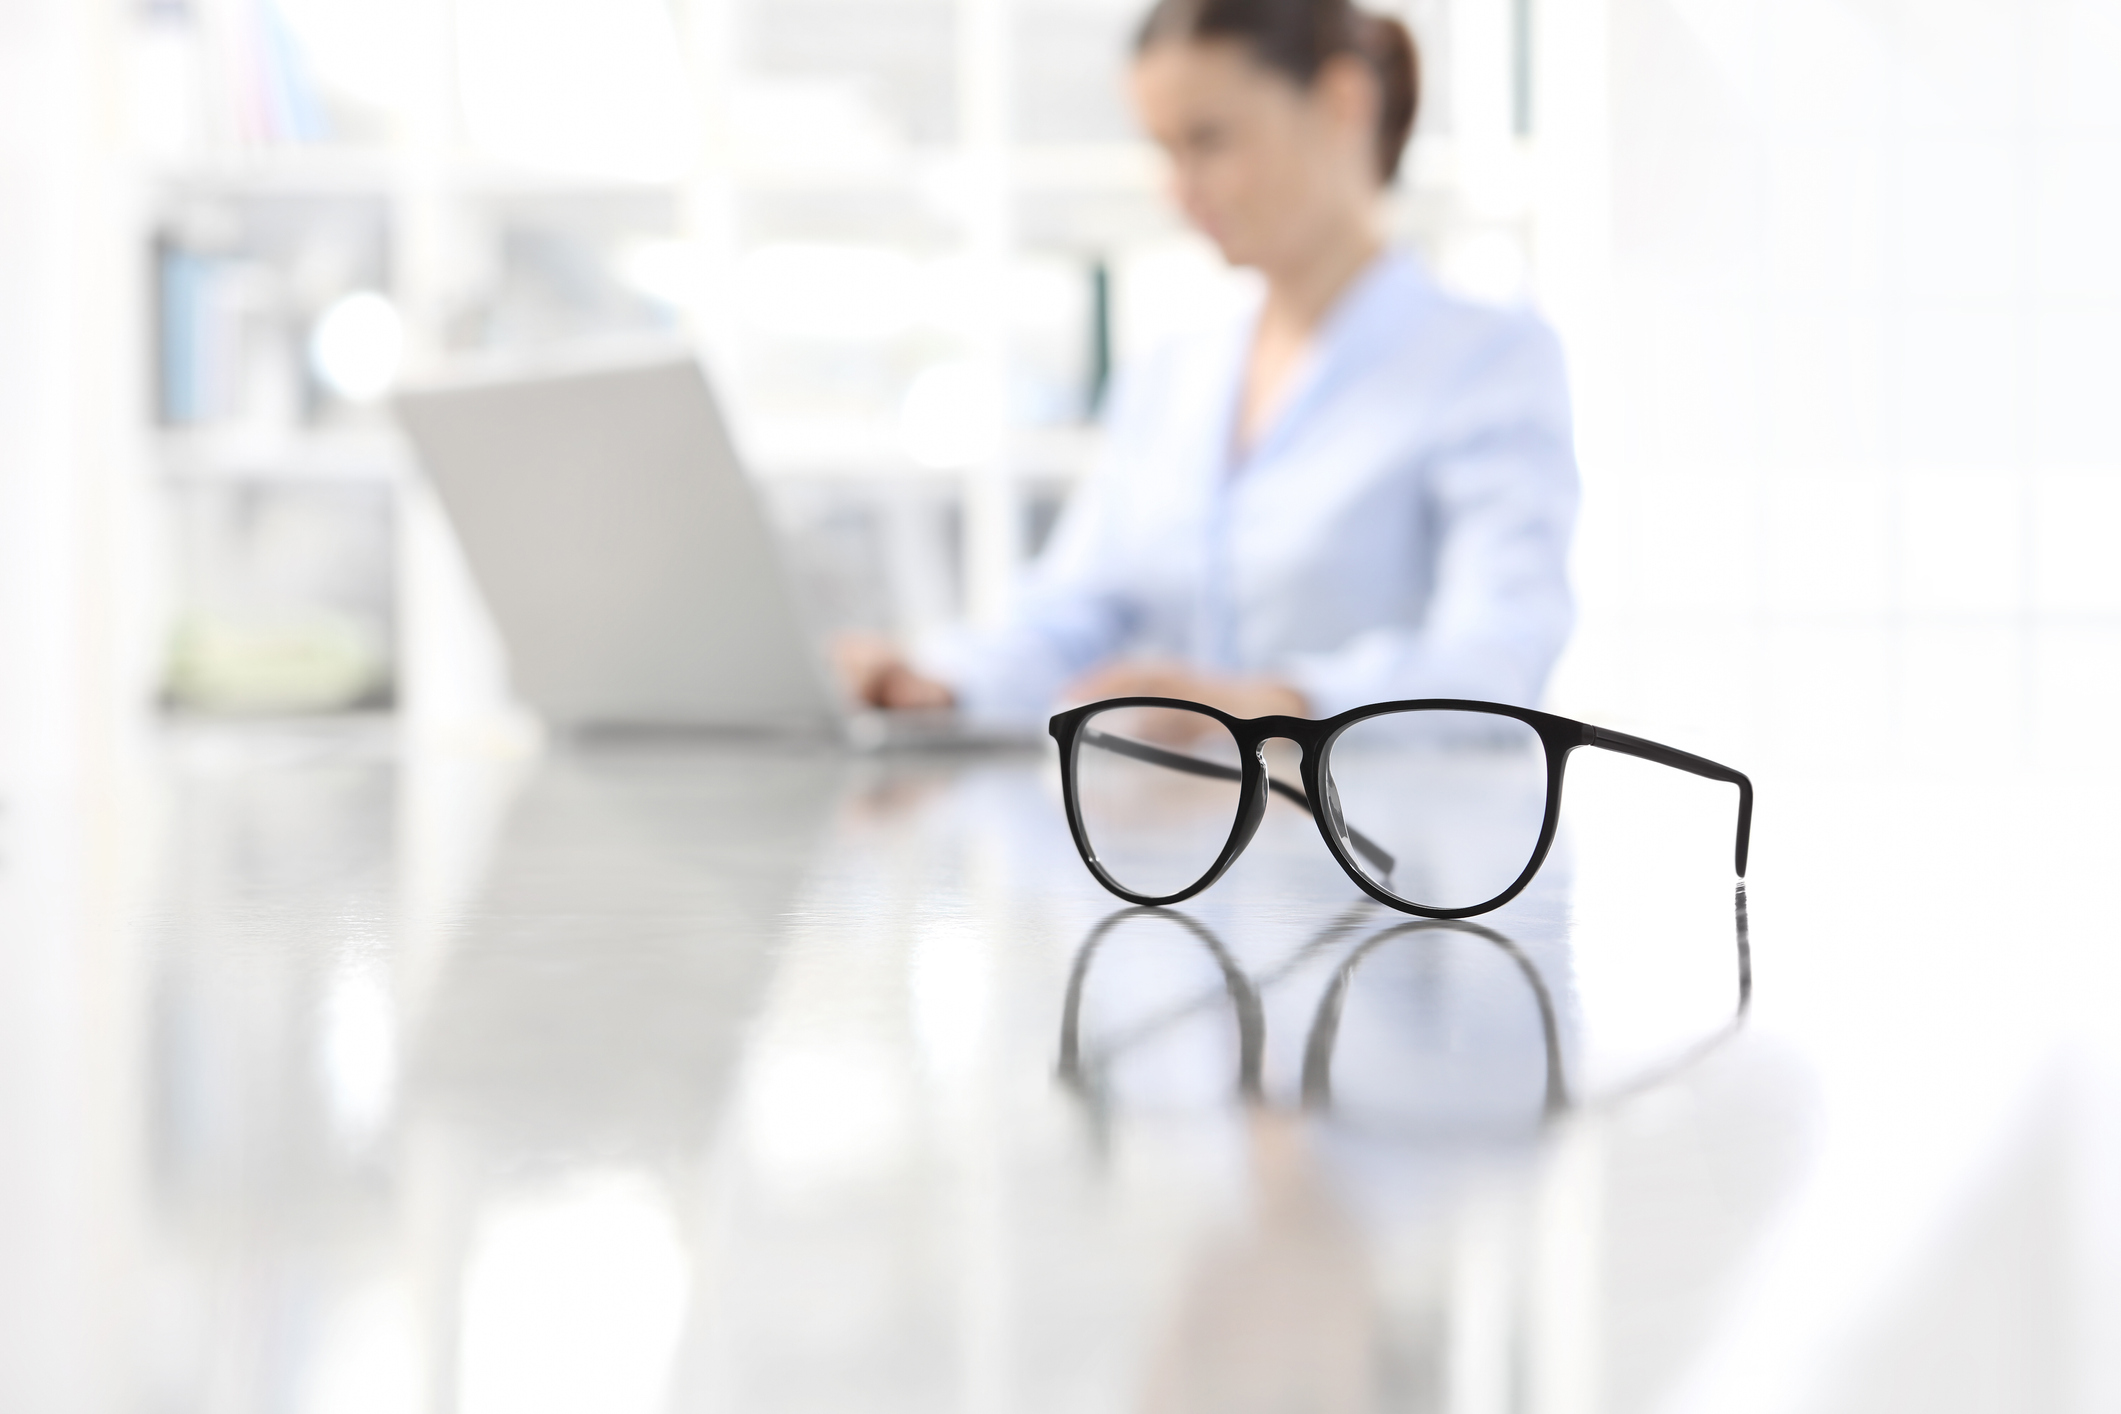 eyeglasses leaning on desk and woman working on computer at office in background